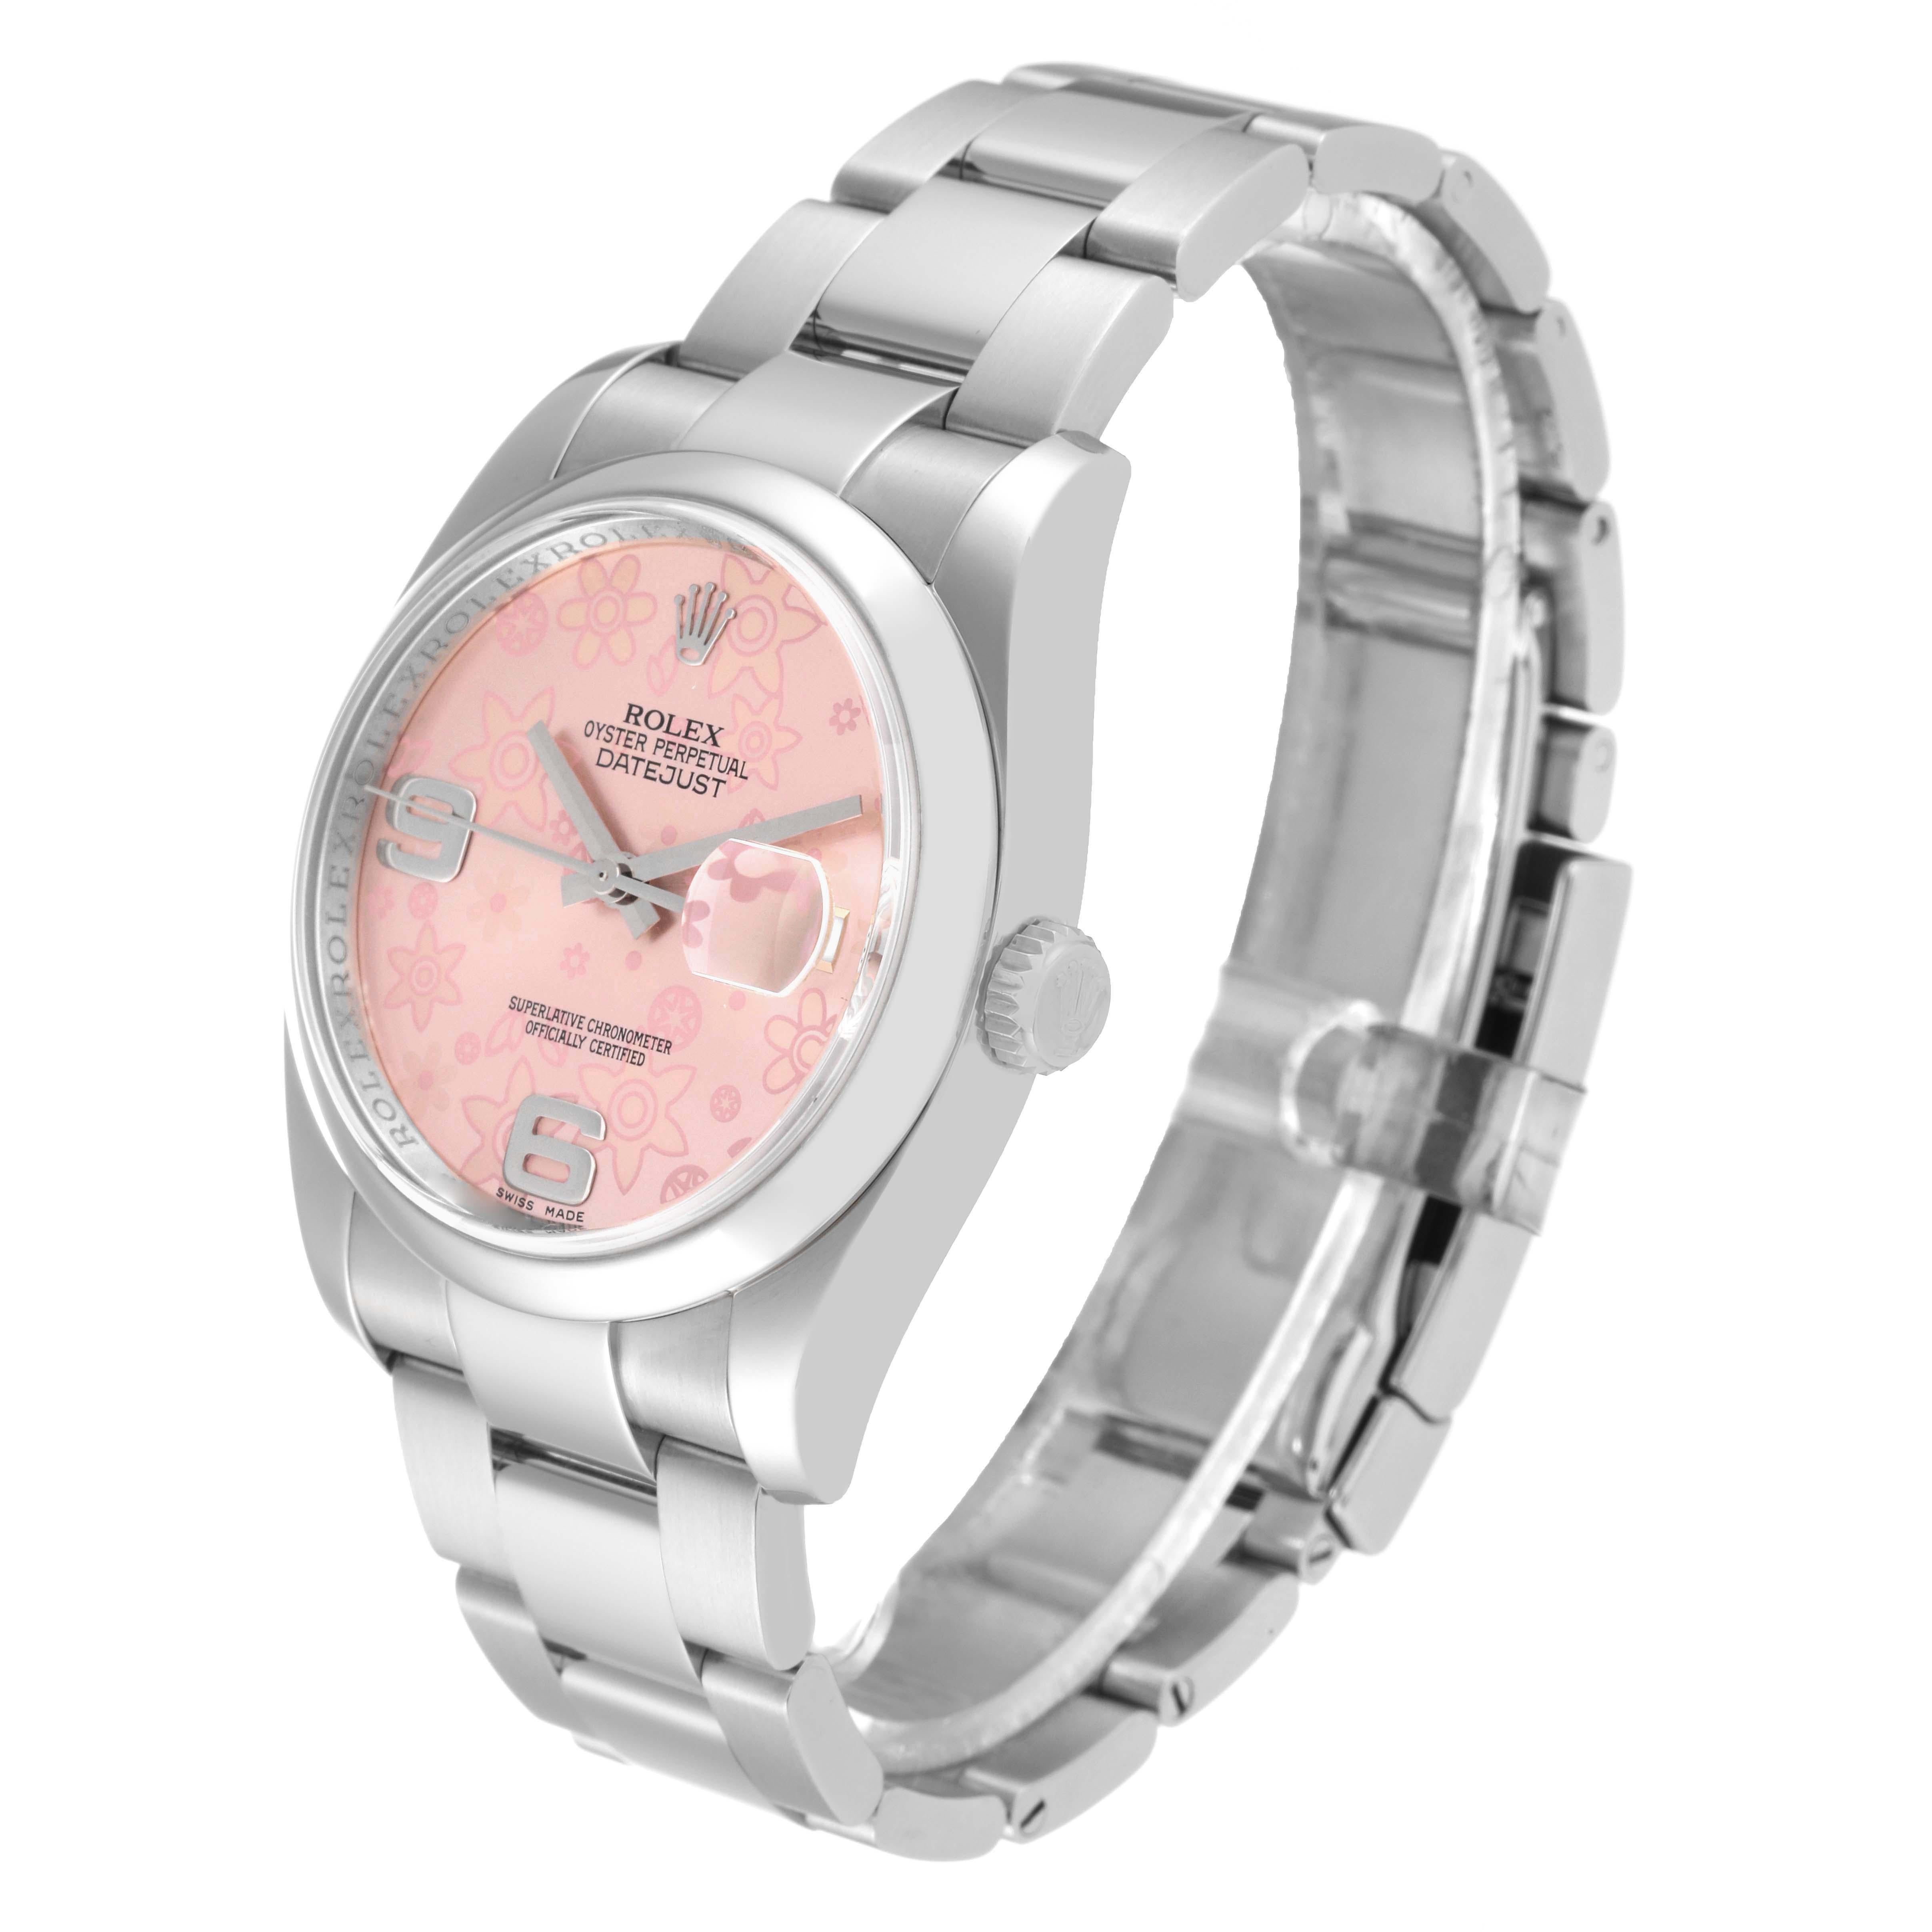 Rolex Datejust 36 Pink Floral Dial Steel Mens Watch 116200 Box Card 2